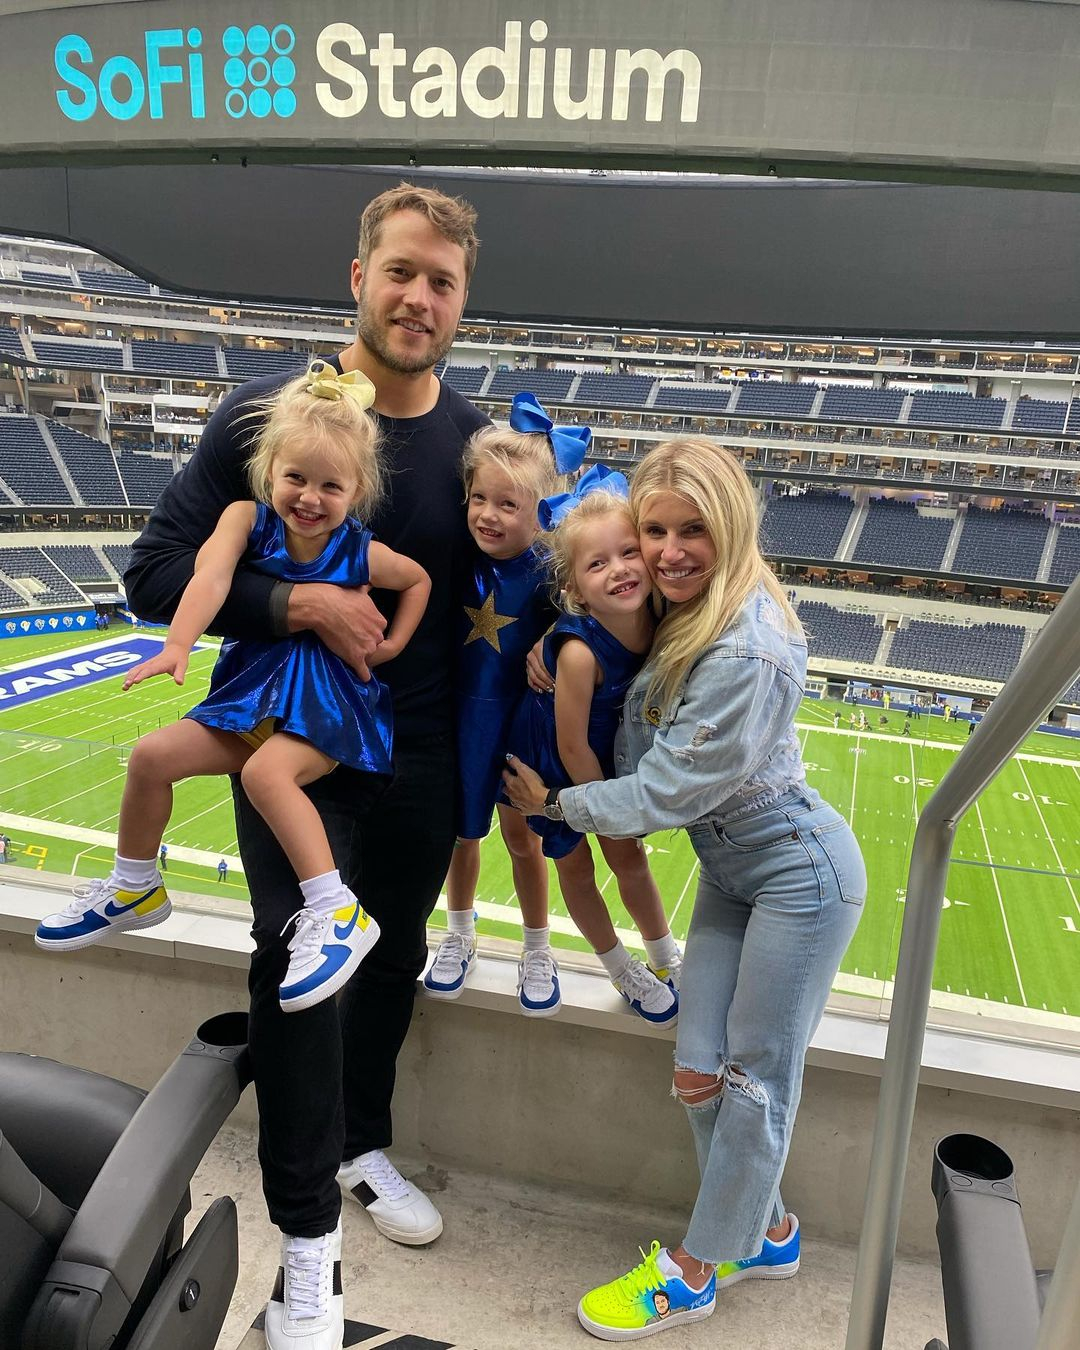 I put my foot in my mouth: Kelly Stafford regrets sharing Rams